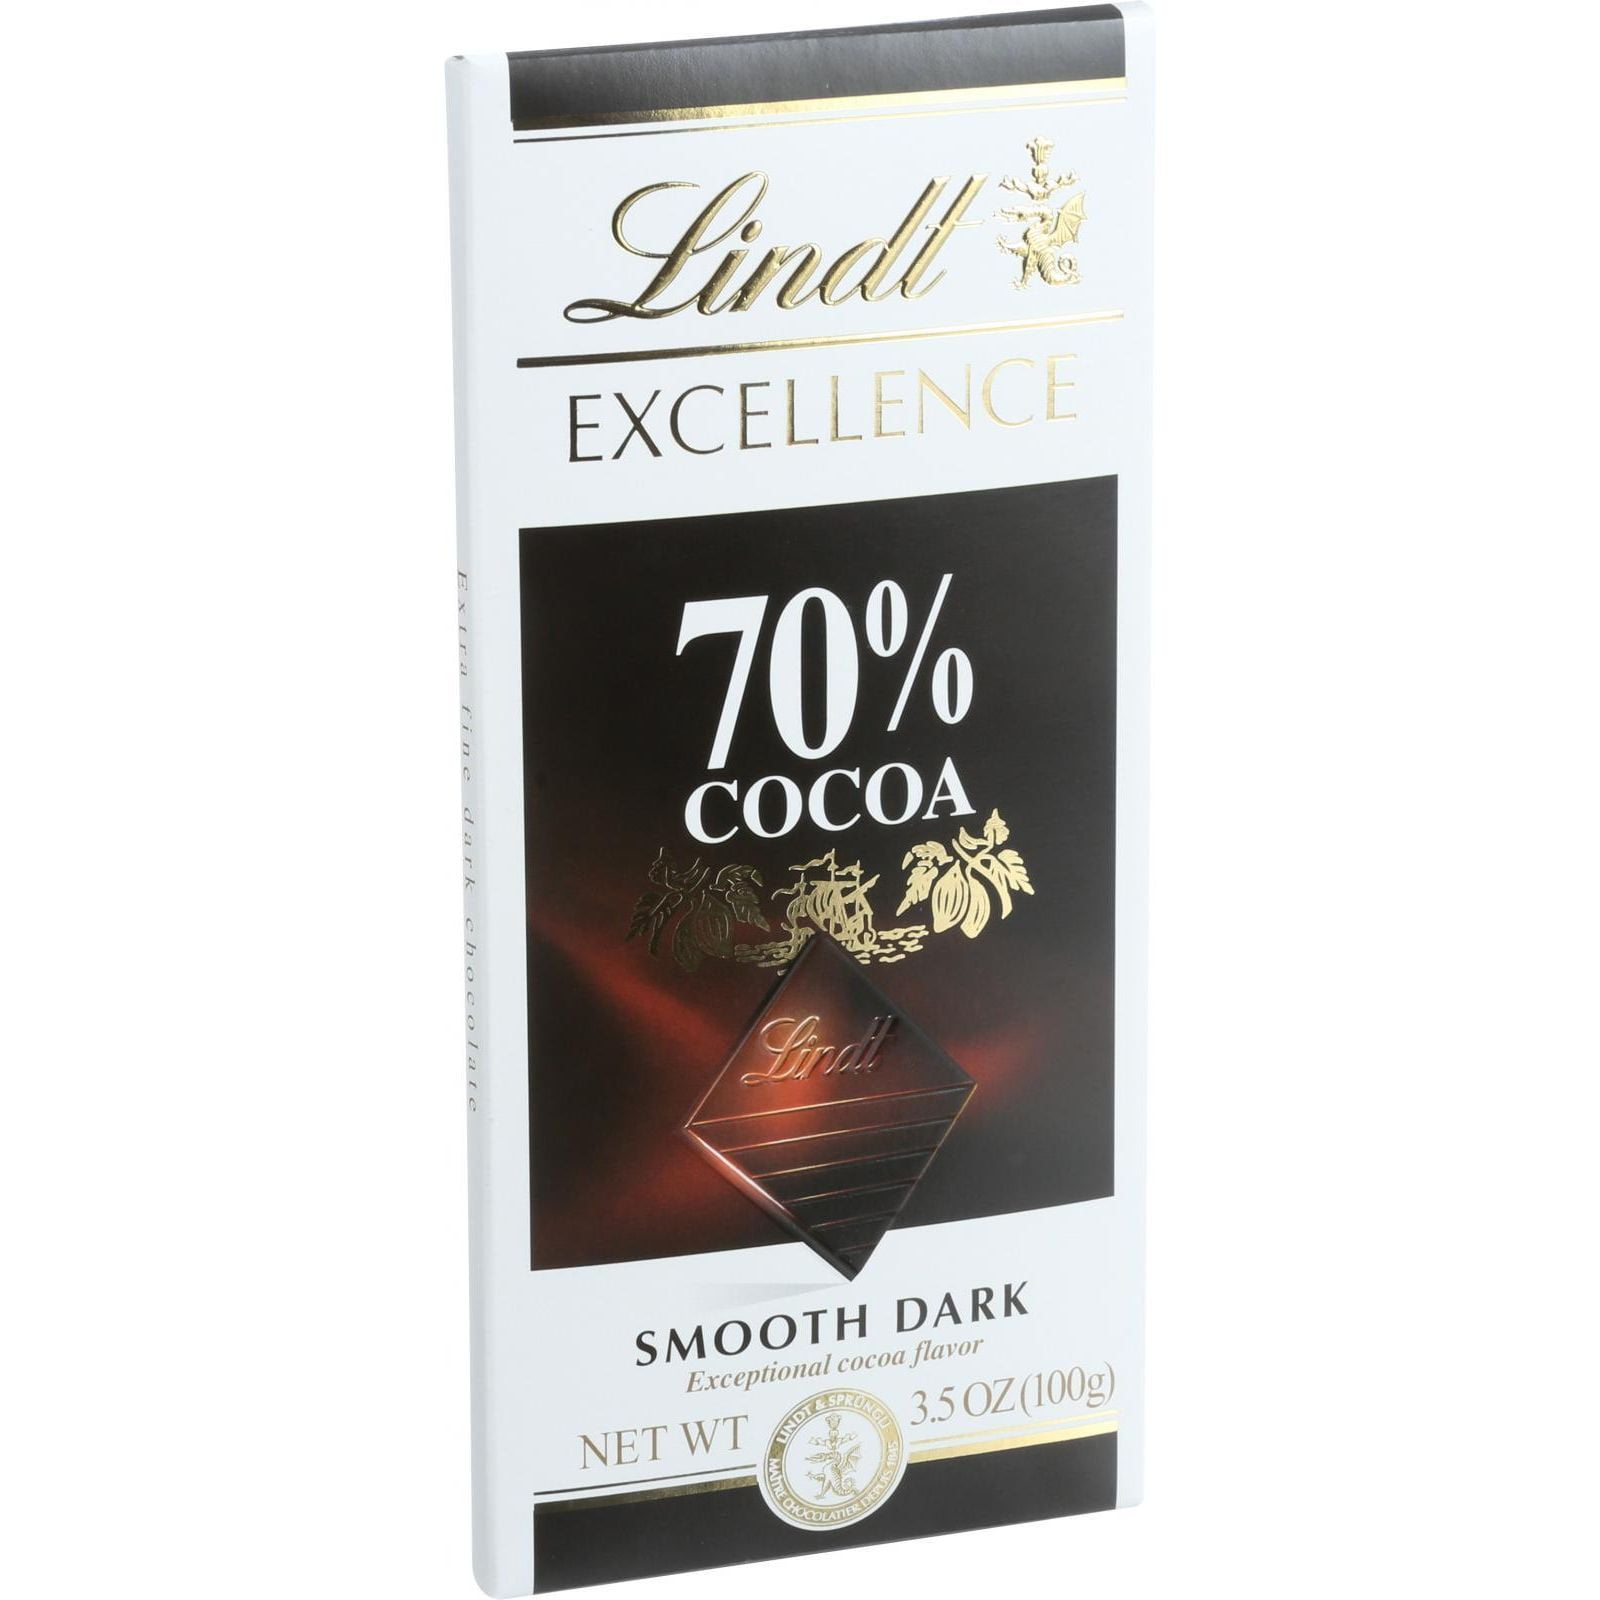 Lindt EXCELLENCE 70% Cocoa Dark Chocolate Bar, Easter Chocolate Candy, 3.5 oz.